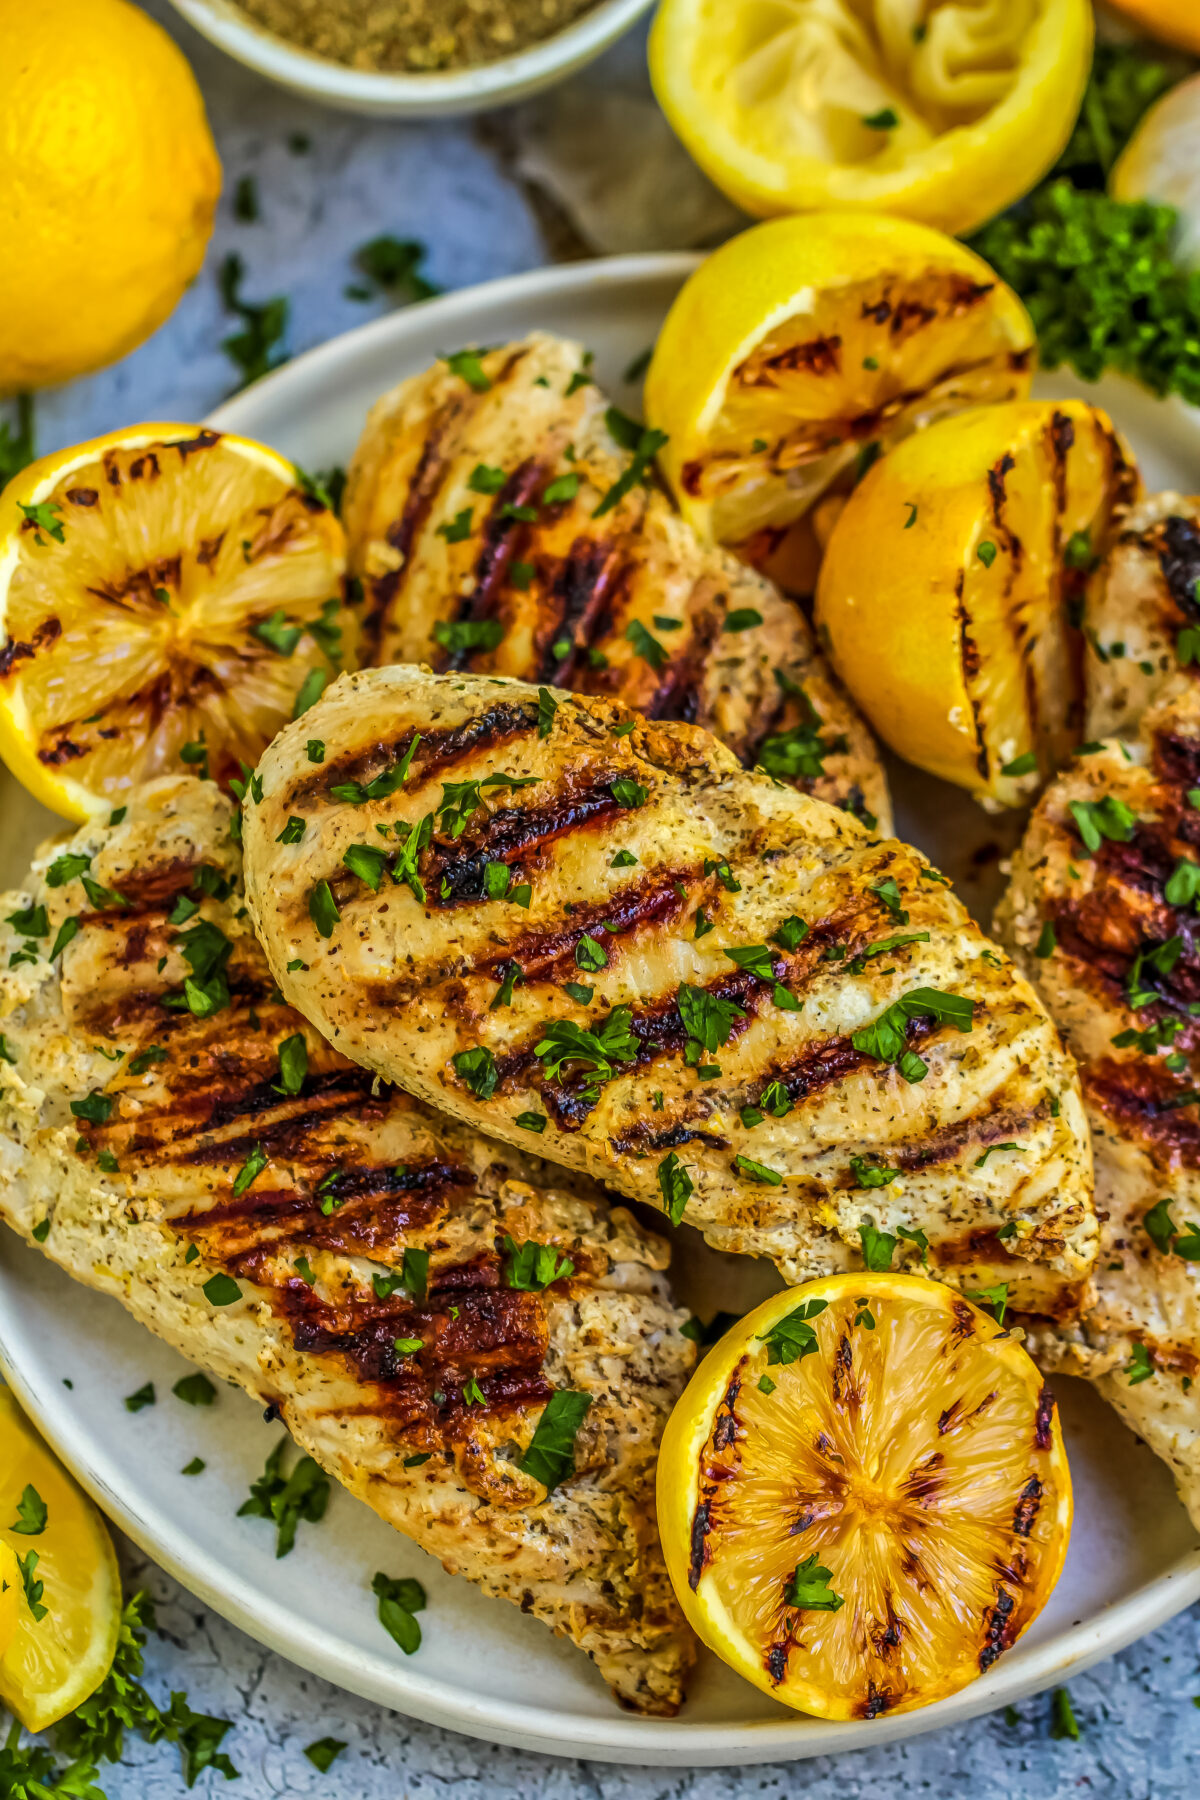 Tender and juicy, Greek yogurt marinated chicken infuses garlic, lemon and oregano together for a flavour loaded Greek chicken dinner.